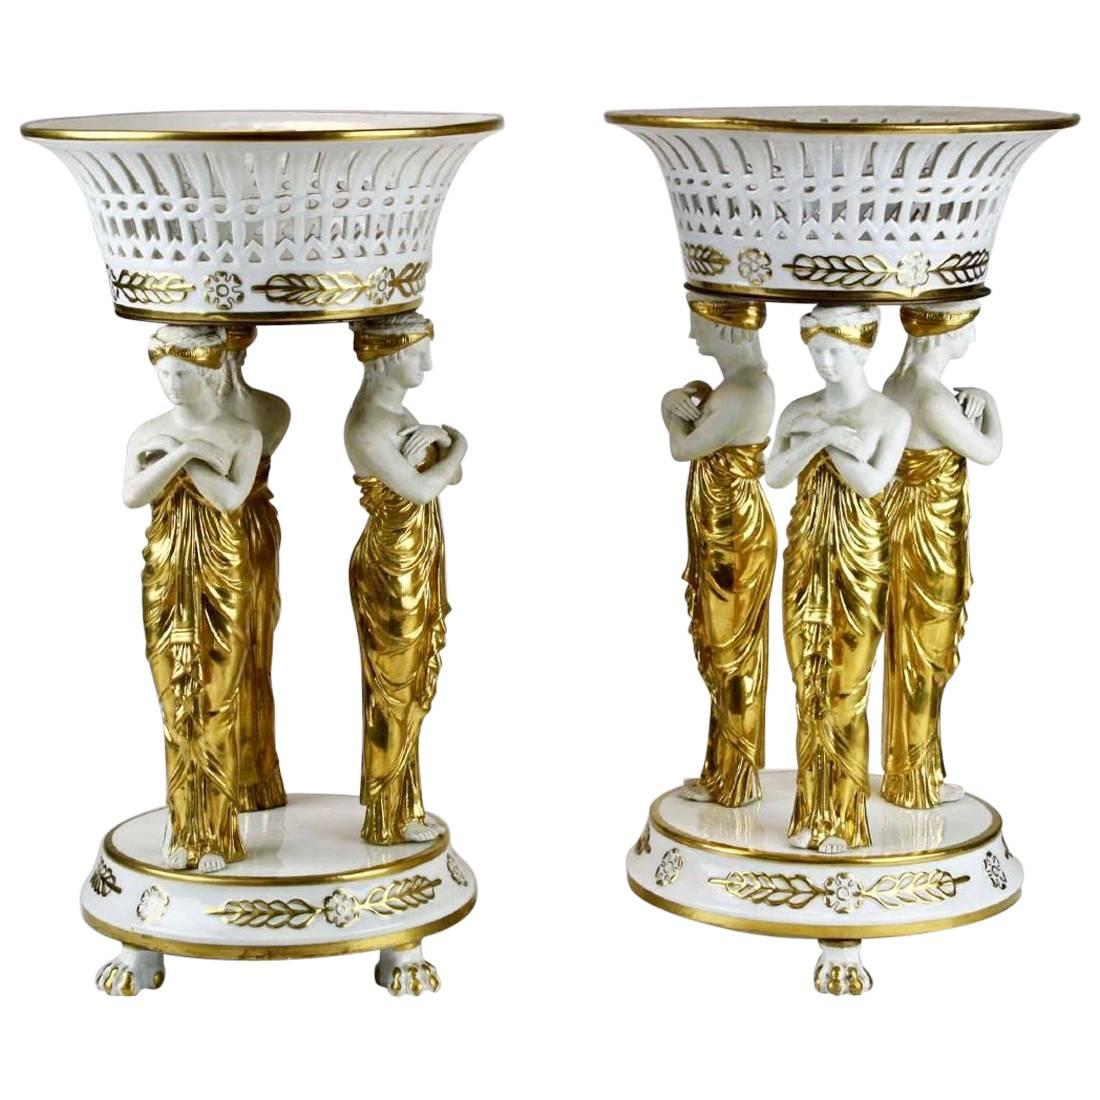 Pair of 19th Century Paris Porcelain Neoclassical Corbeille or Centrepieces For Sale